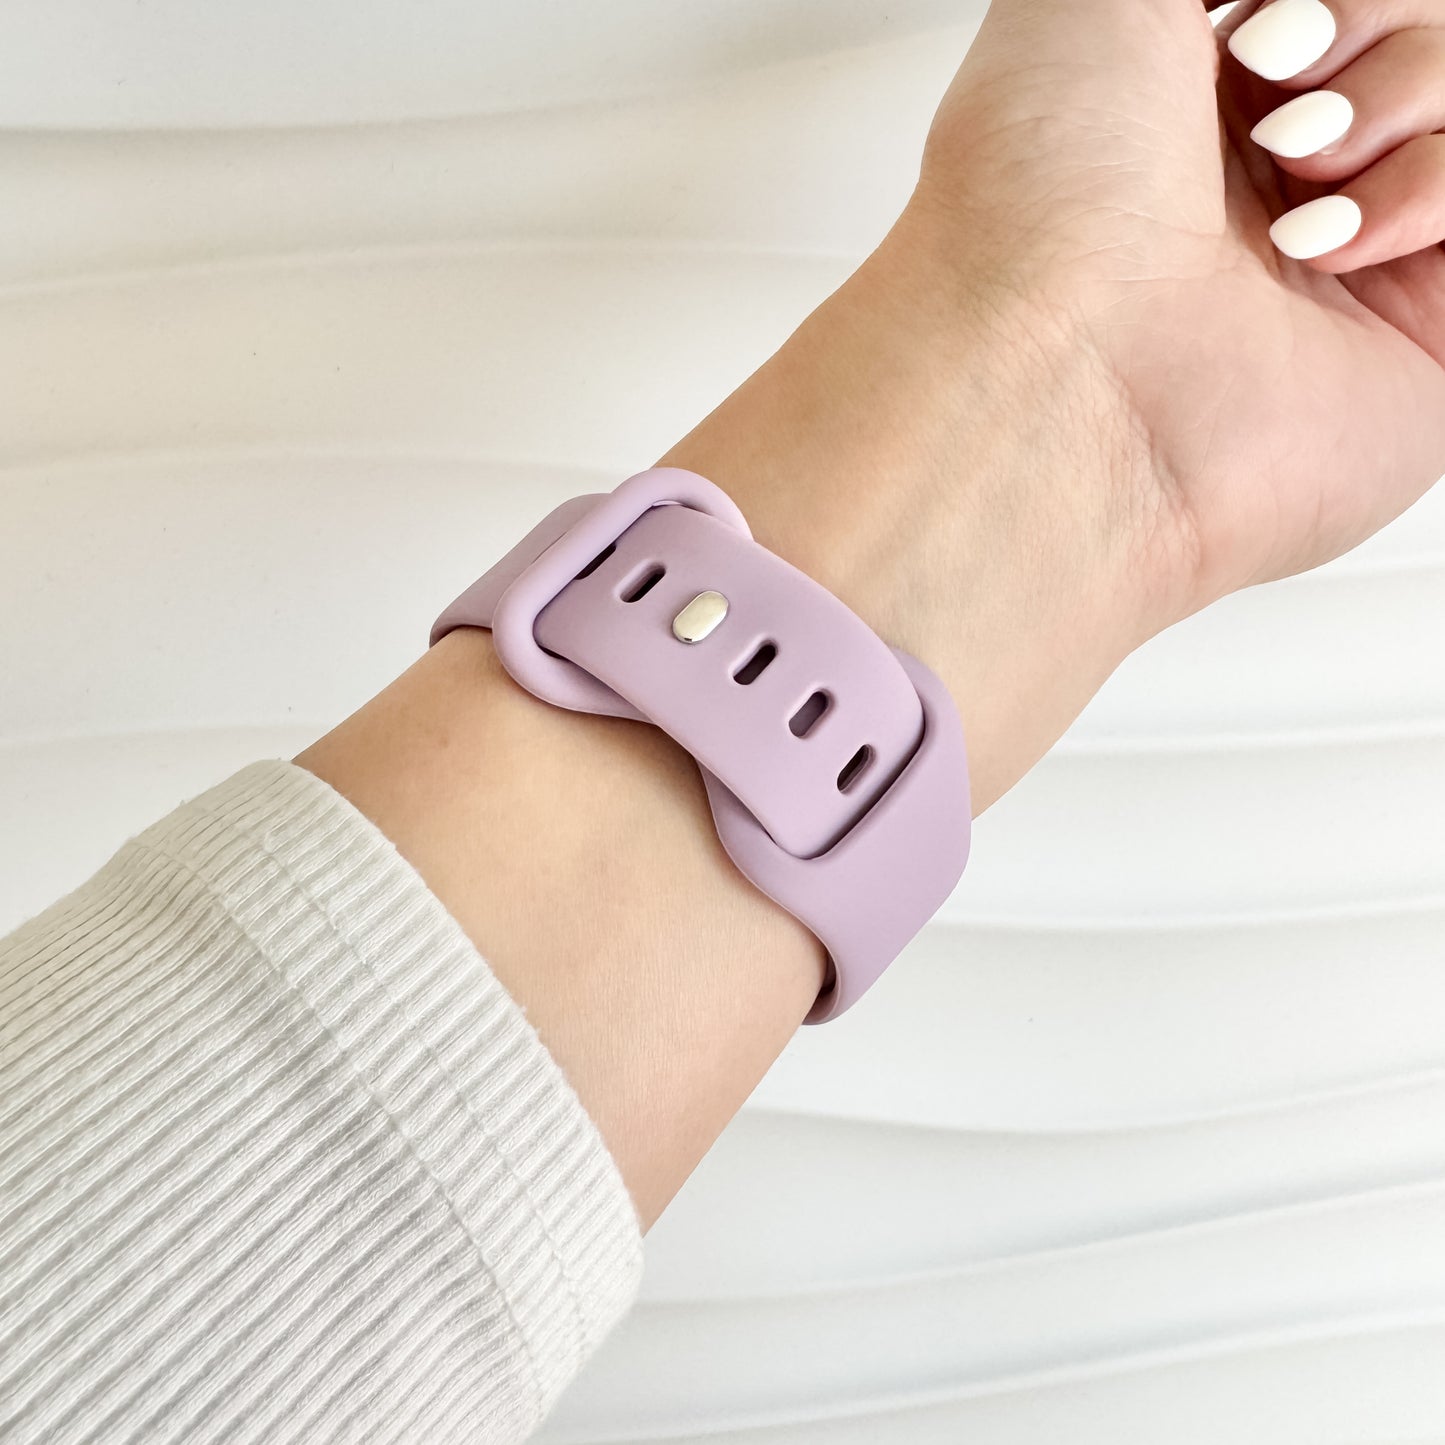 Classic Rubber Knob Apple Watch Band - Lavender